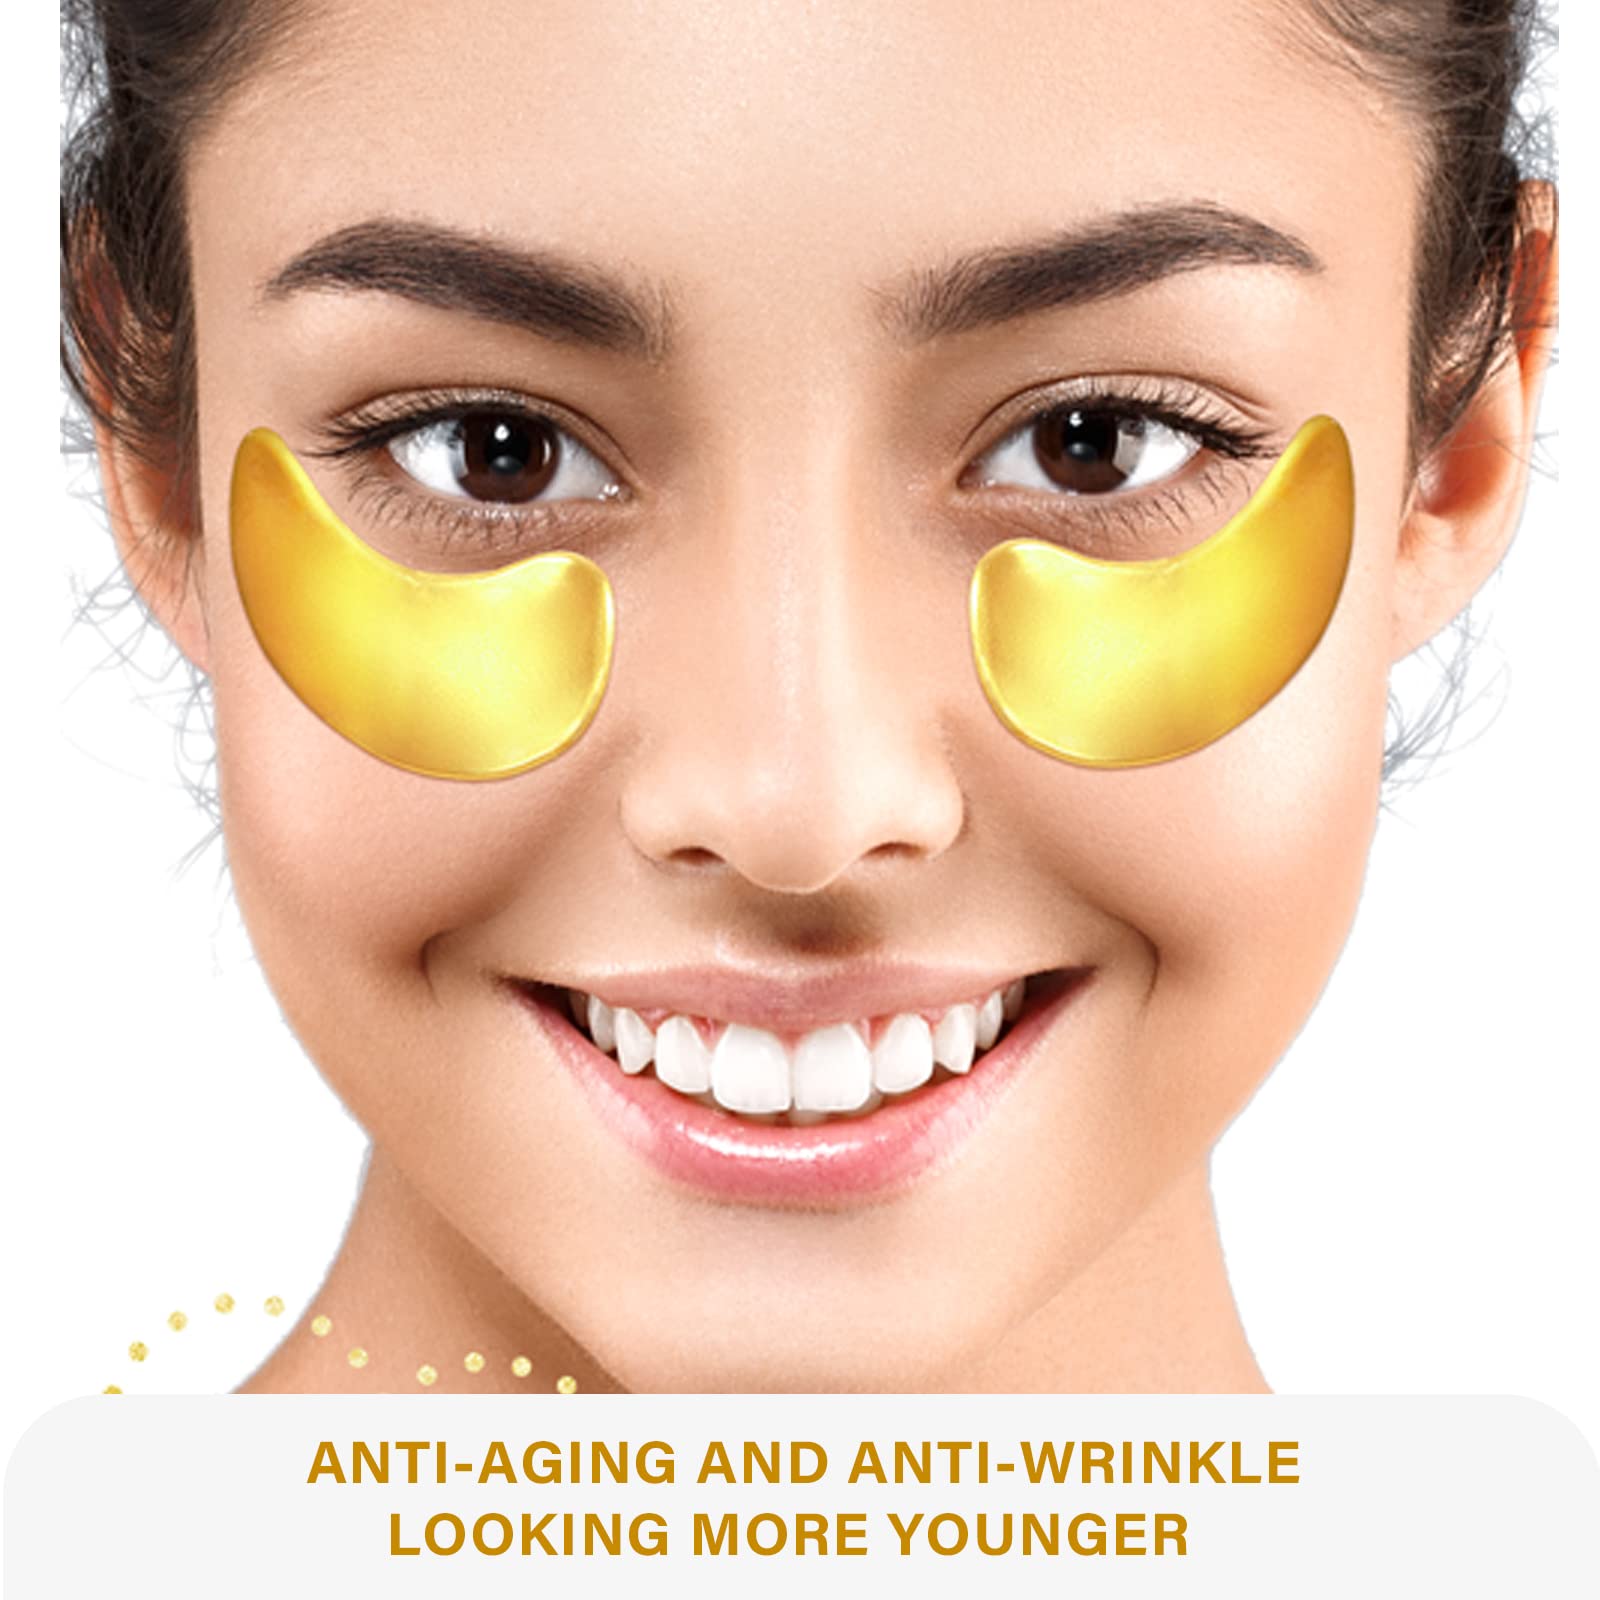 Adofect 30 Pairs Gold Eye Mask Under eye patches Power Crystal Gel Collagen Masks Great For Face, Dark Circles and Puffiness, Beauty & Personal Care